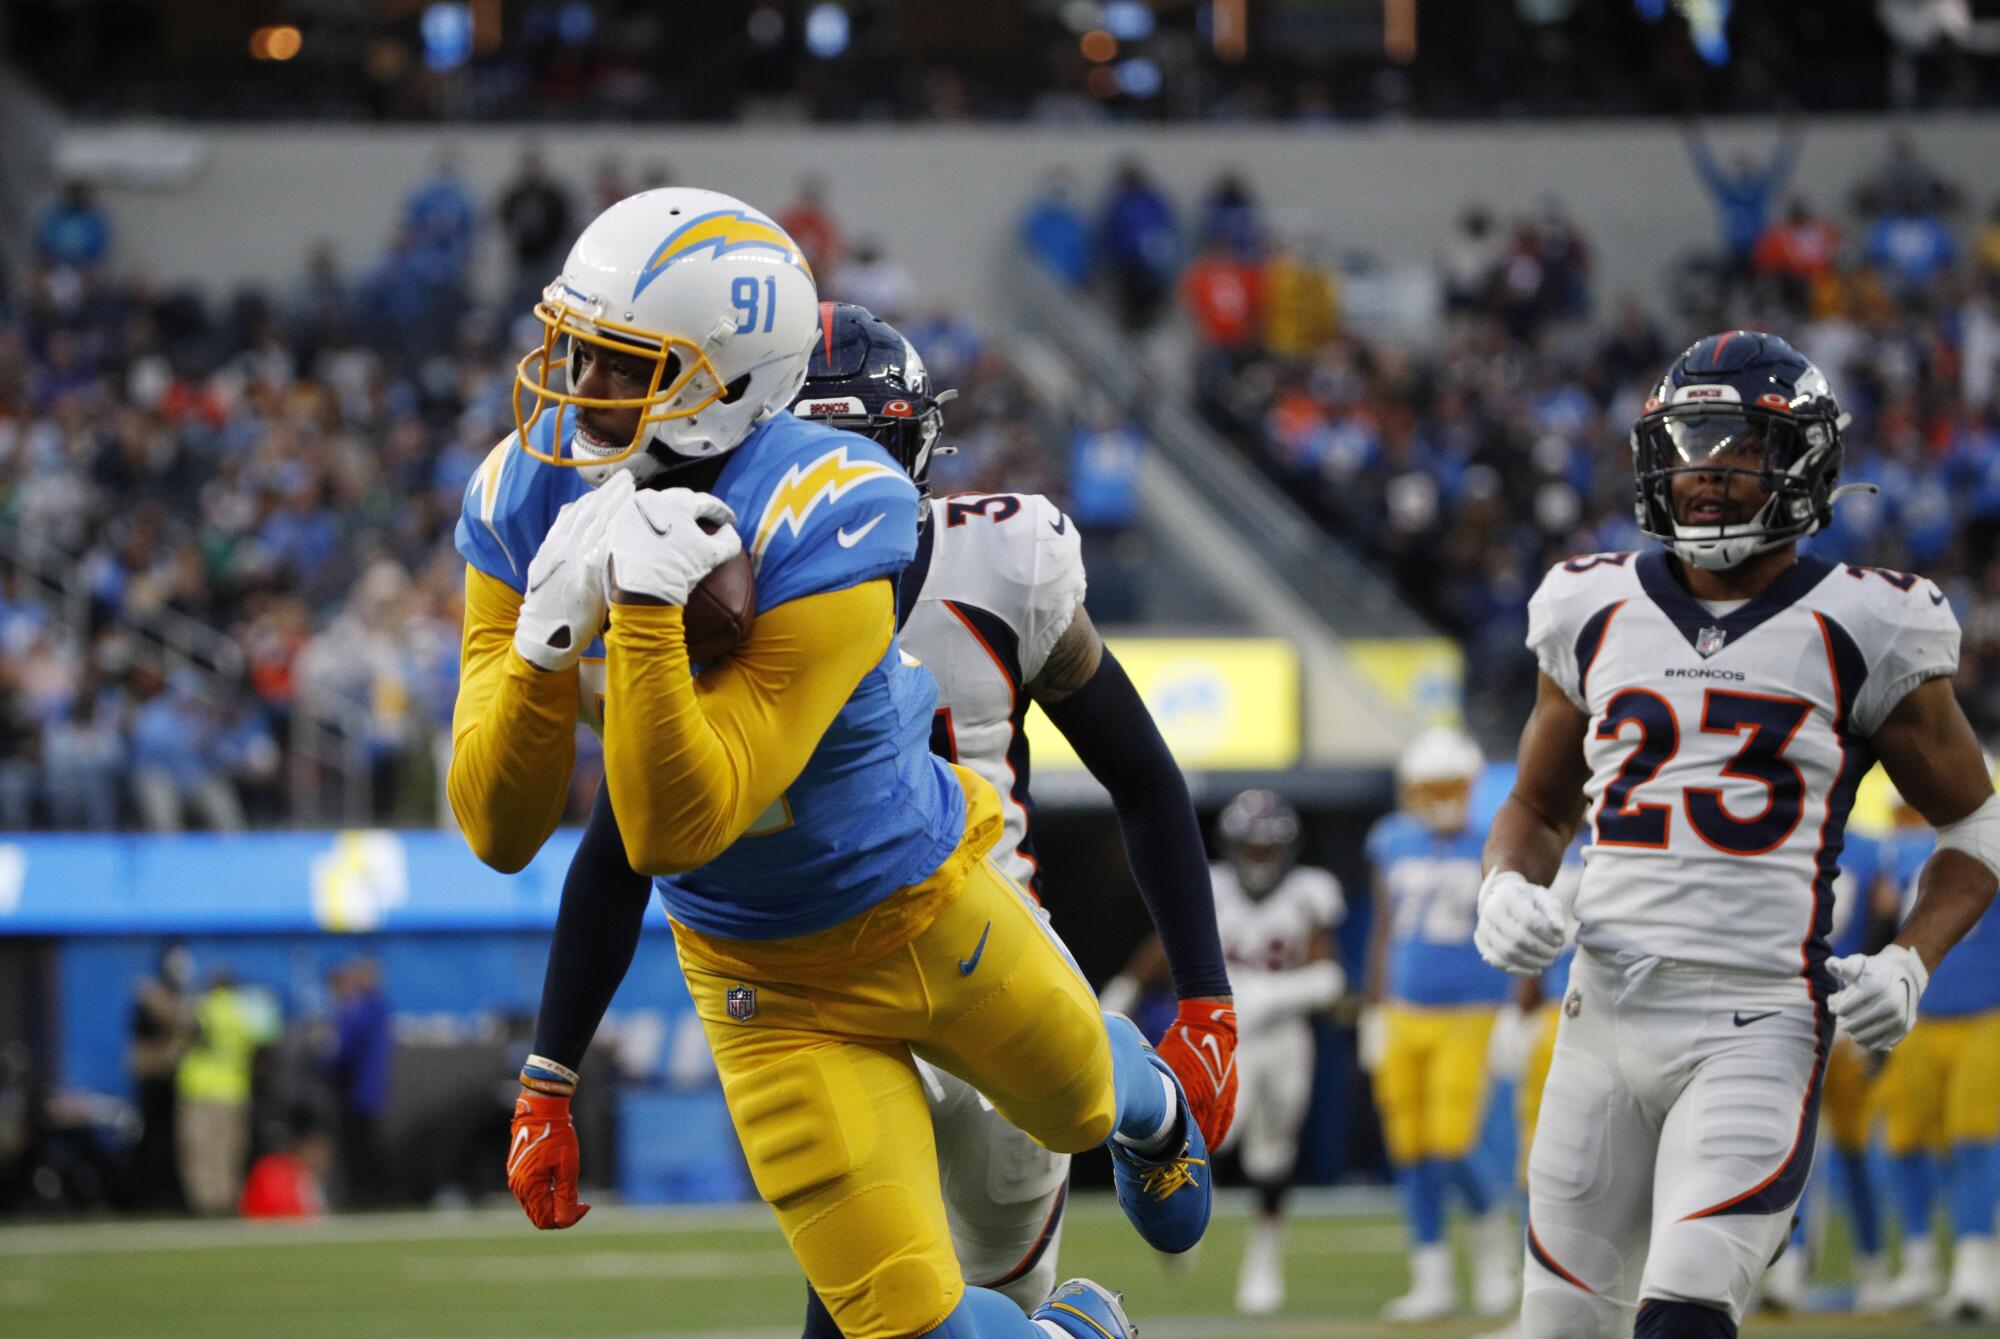 Chargers wide receiver Mike Williams pulls in a TD catch in front of Denver Broncos free safety Justin Simmons.